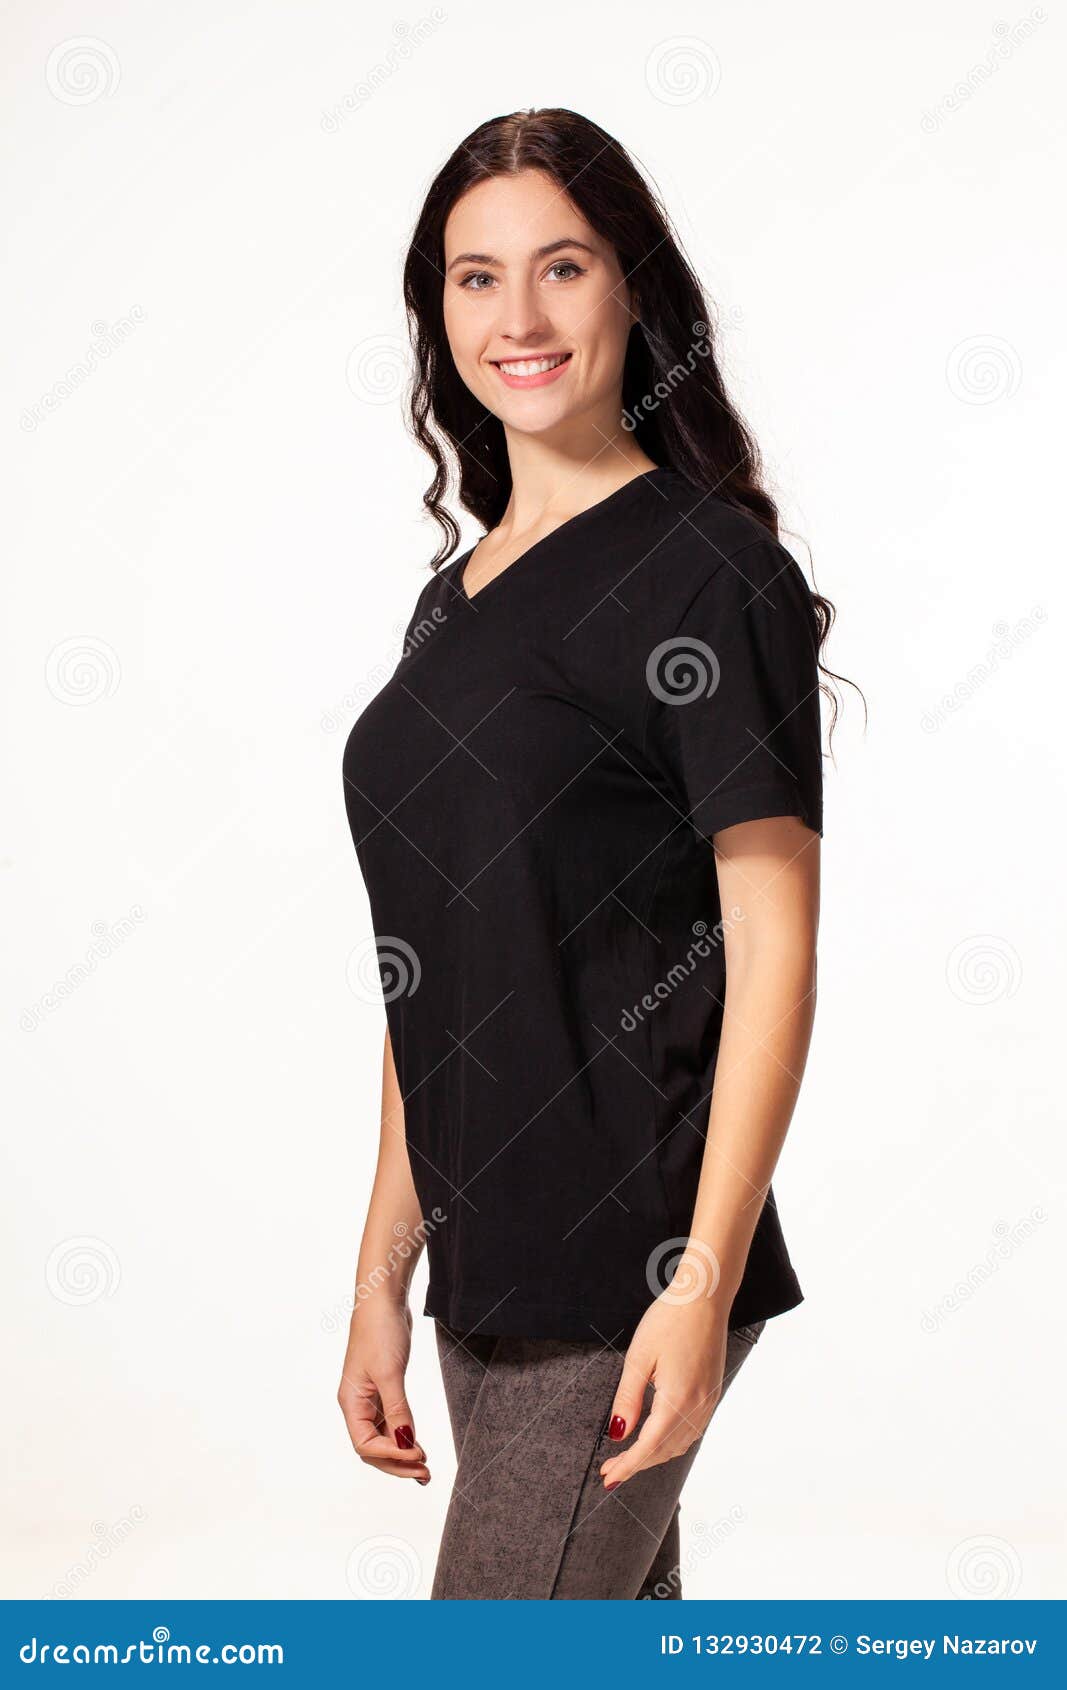 woman posing standing sideways  on white background